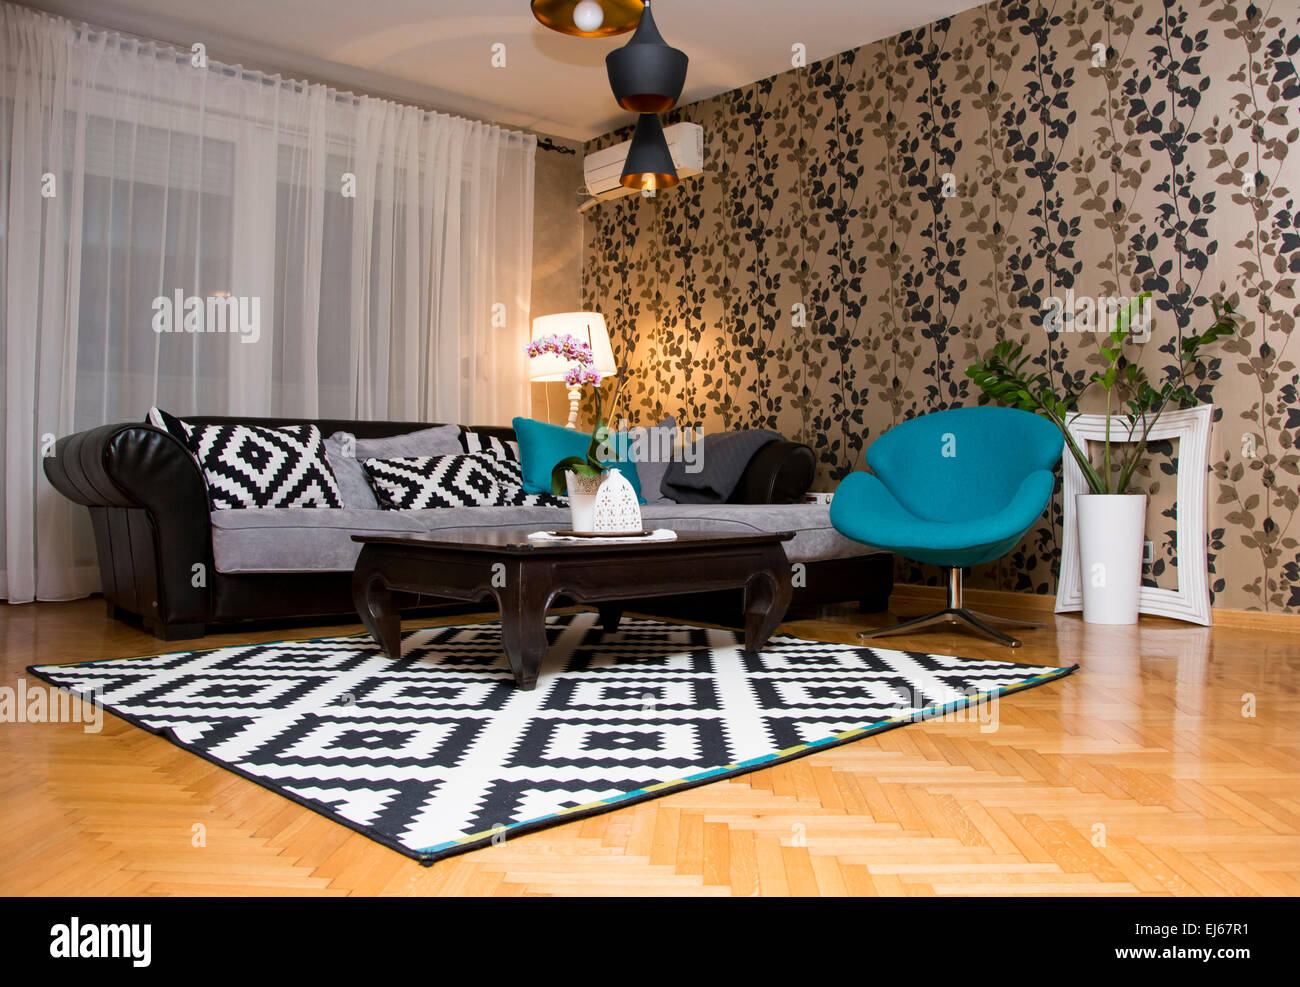 Eccentric design for living room interior with blue black and white details Stock Photo